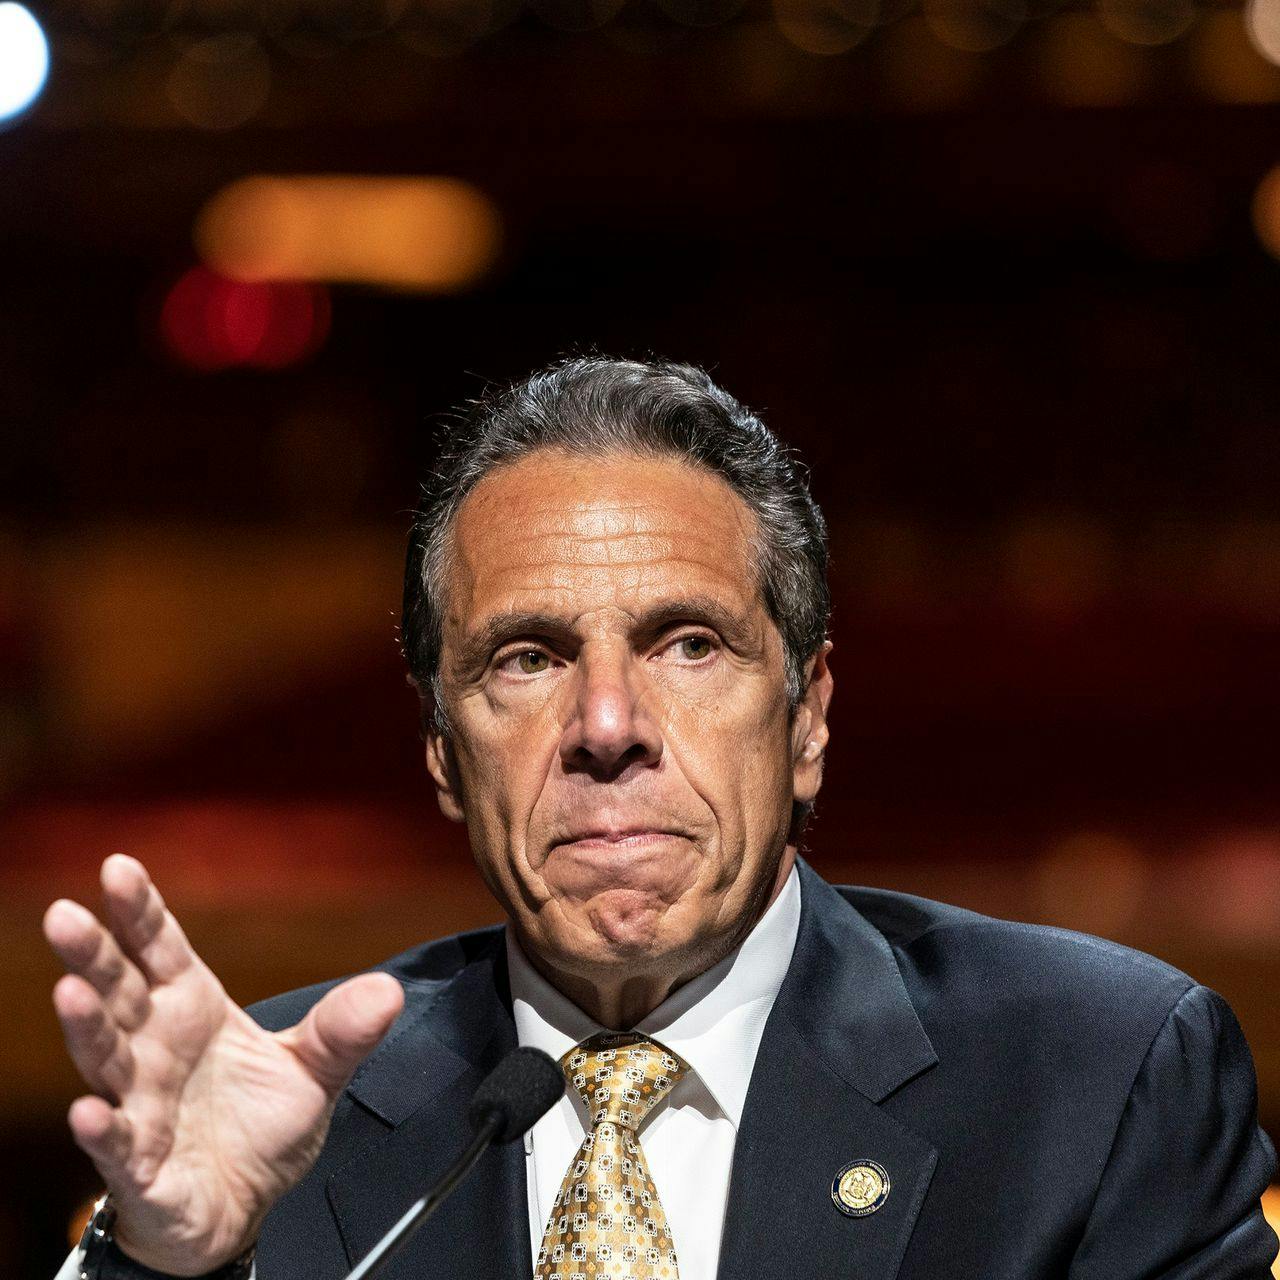 Voters Stand By Cuomo